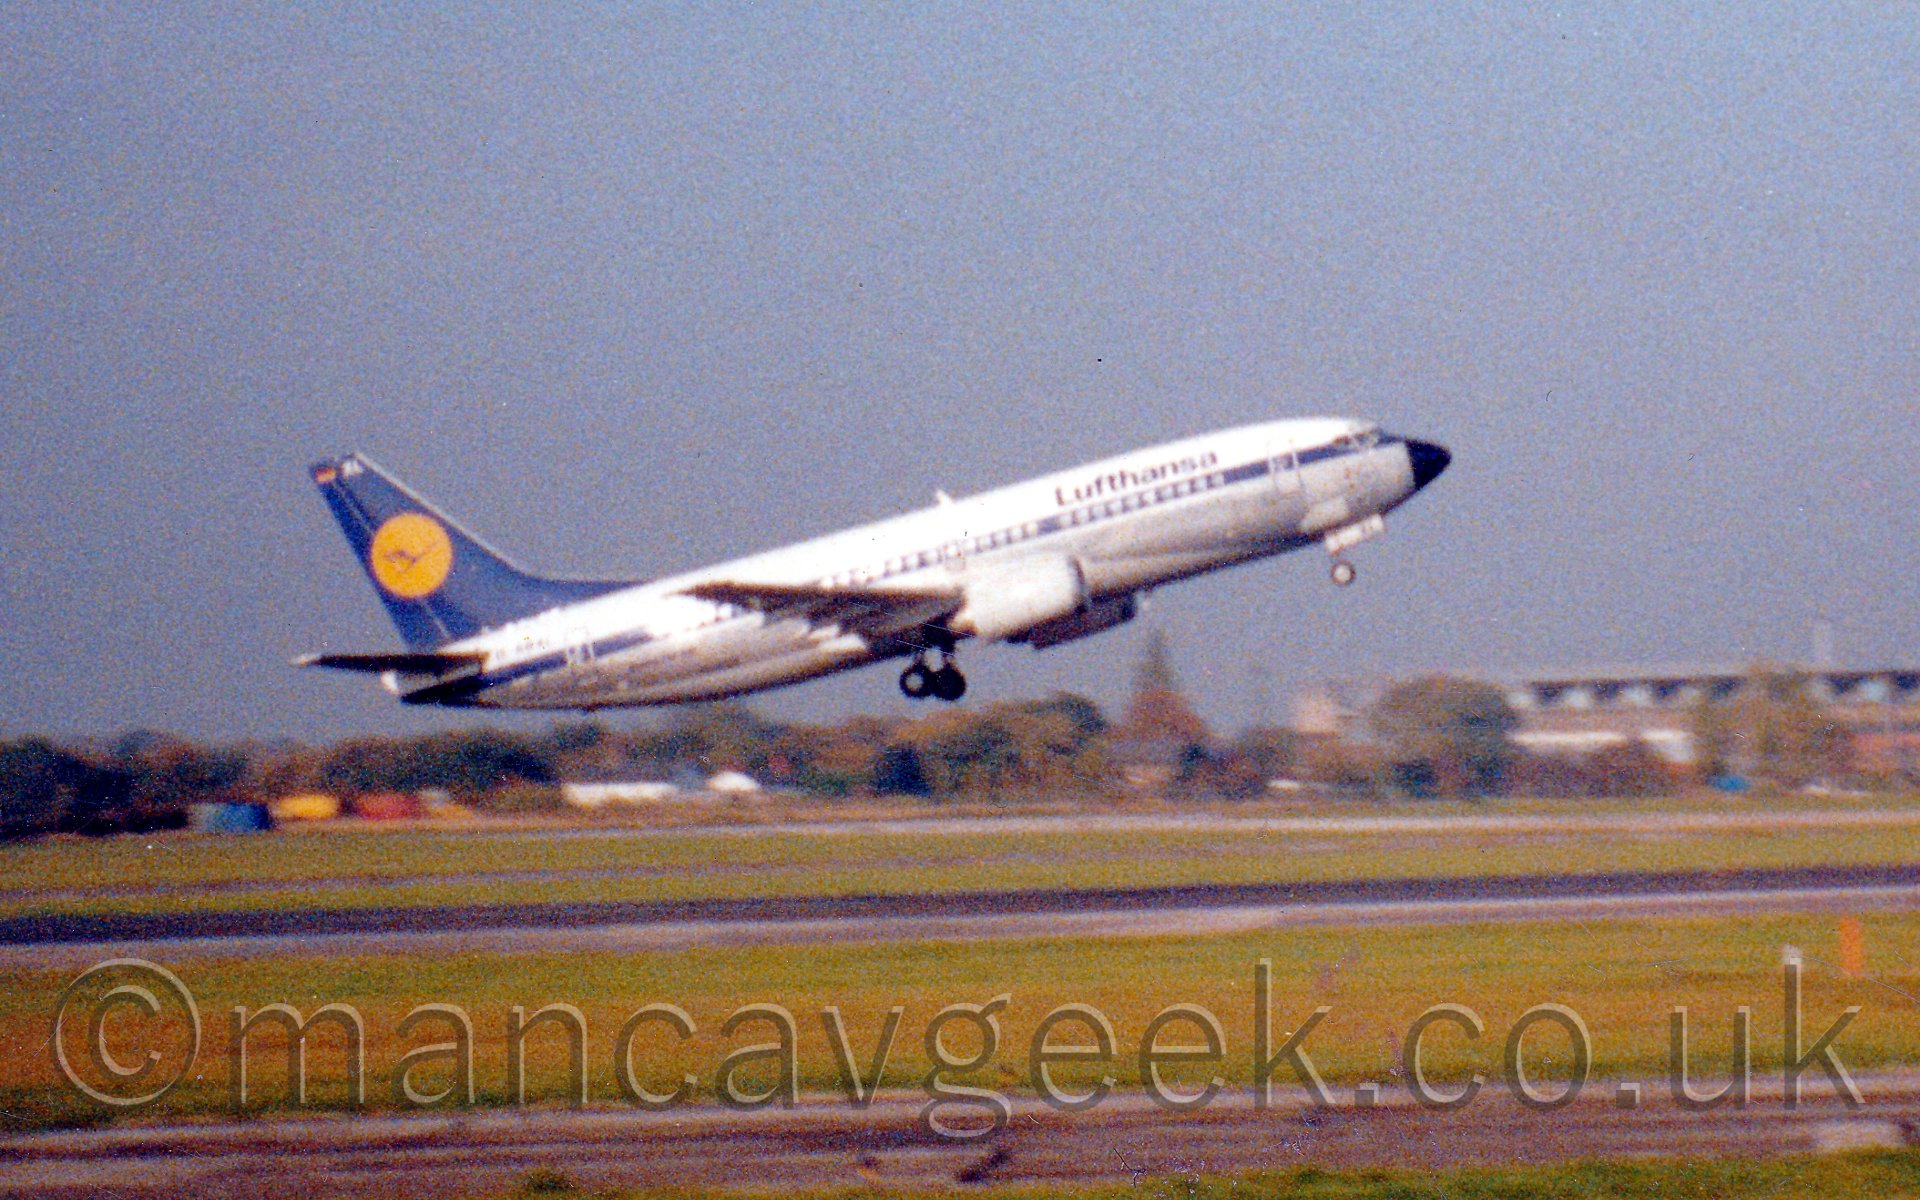 Rather grainy side view of a white, silver, and blue, twin engined jet airliner flying from left to right just feet above a runway, it's nose raised around 30 degrees, suggesting it has just taken off, with green grass and grey taxiways in the background stretching off to rows of trees in the distance, under a hazy grey-blue sky.